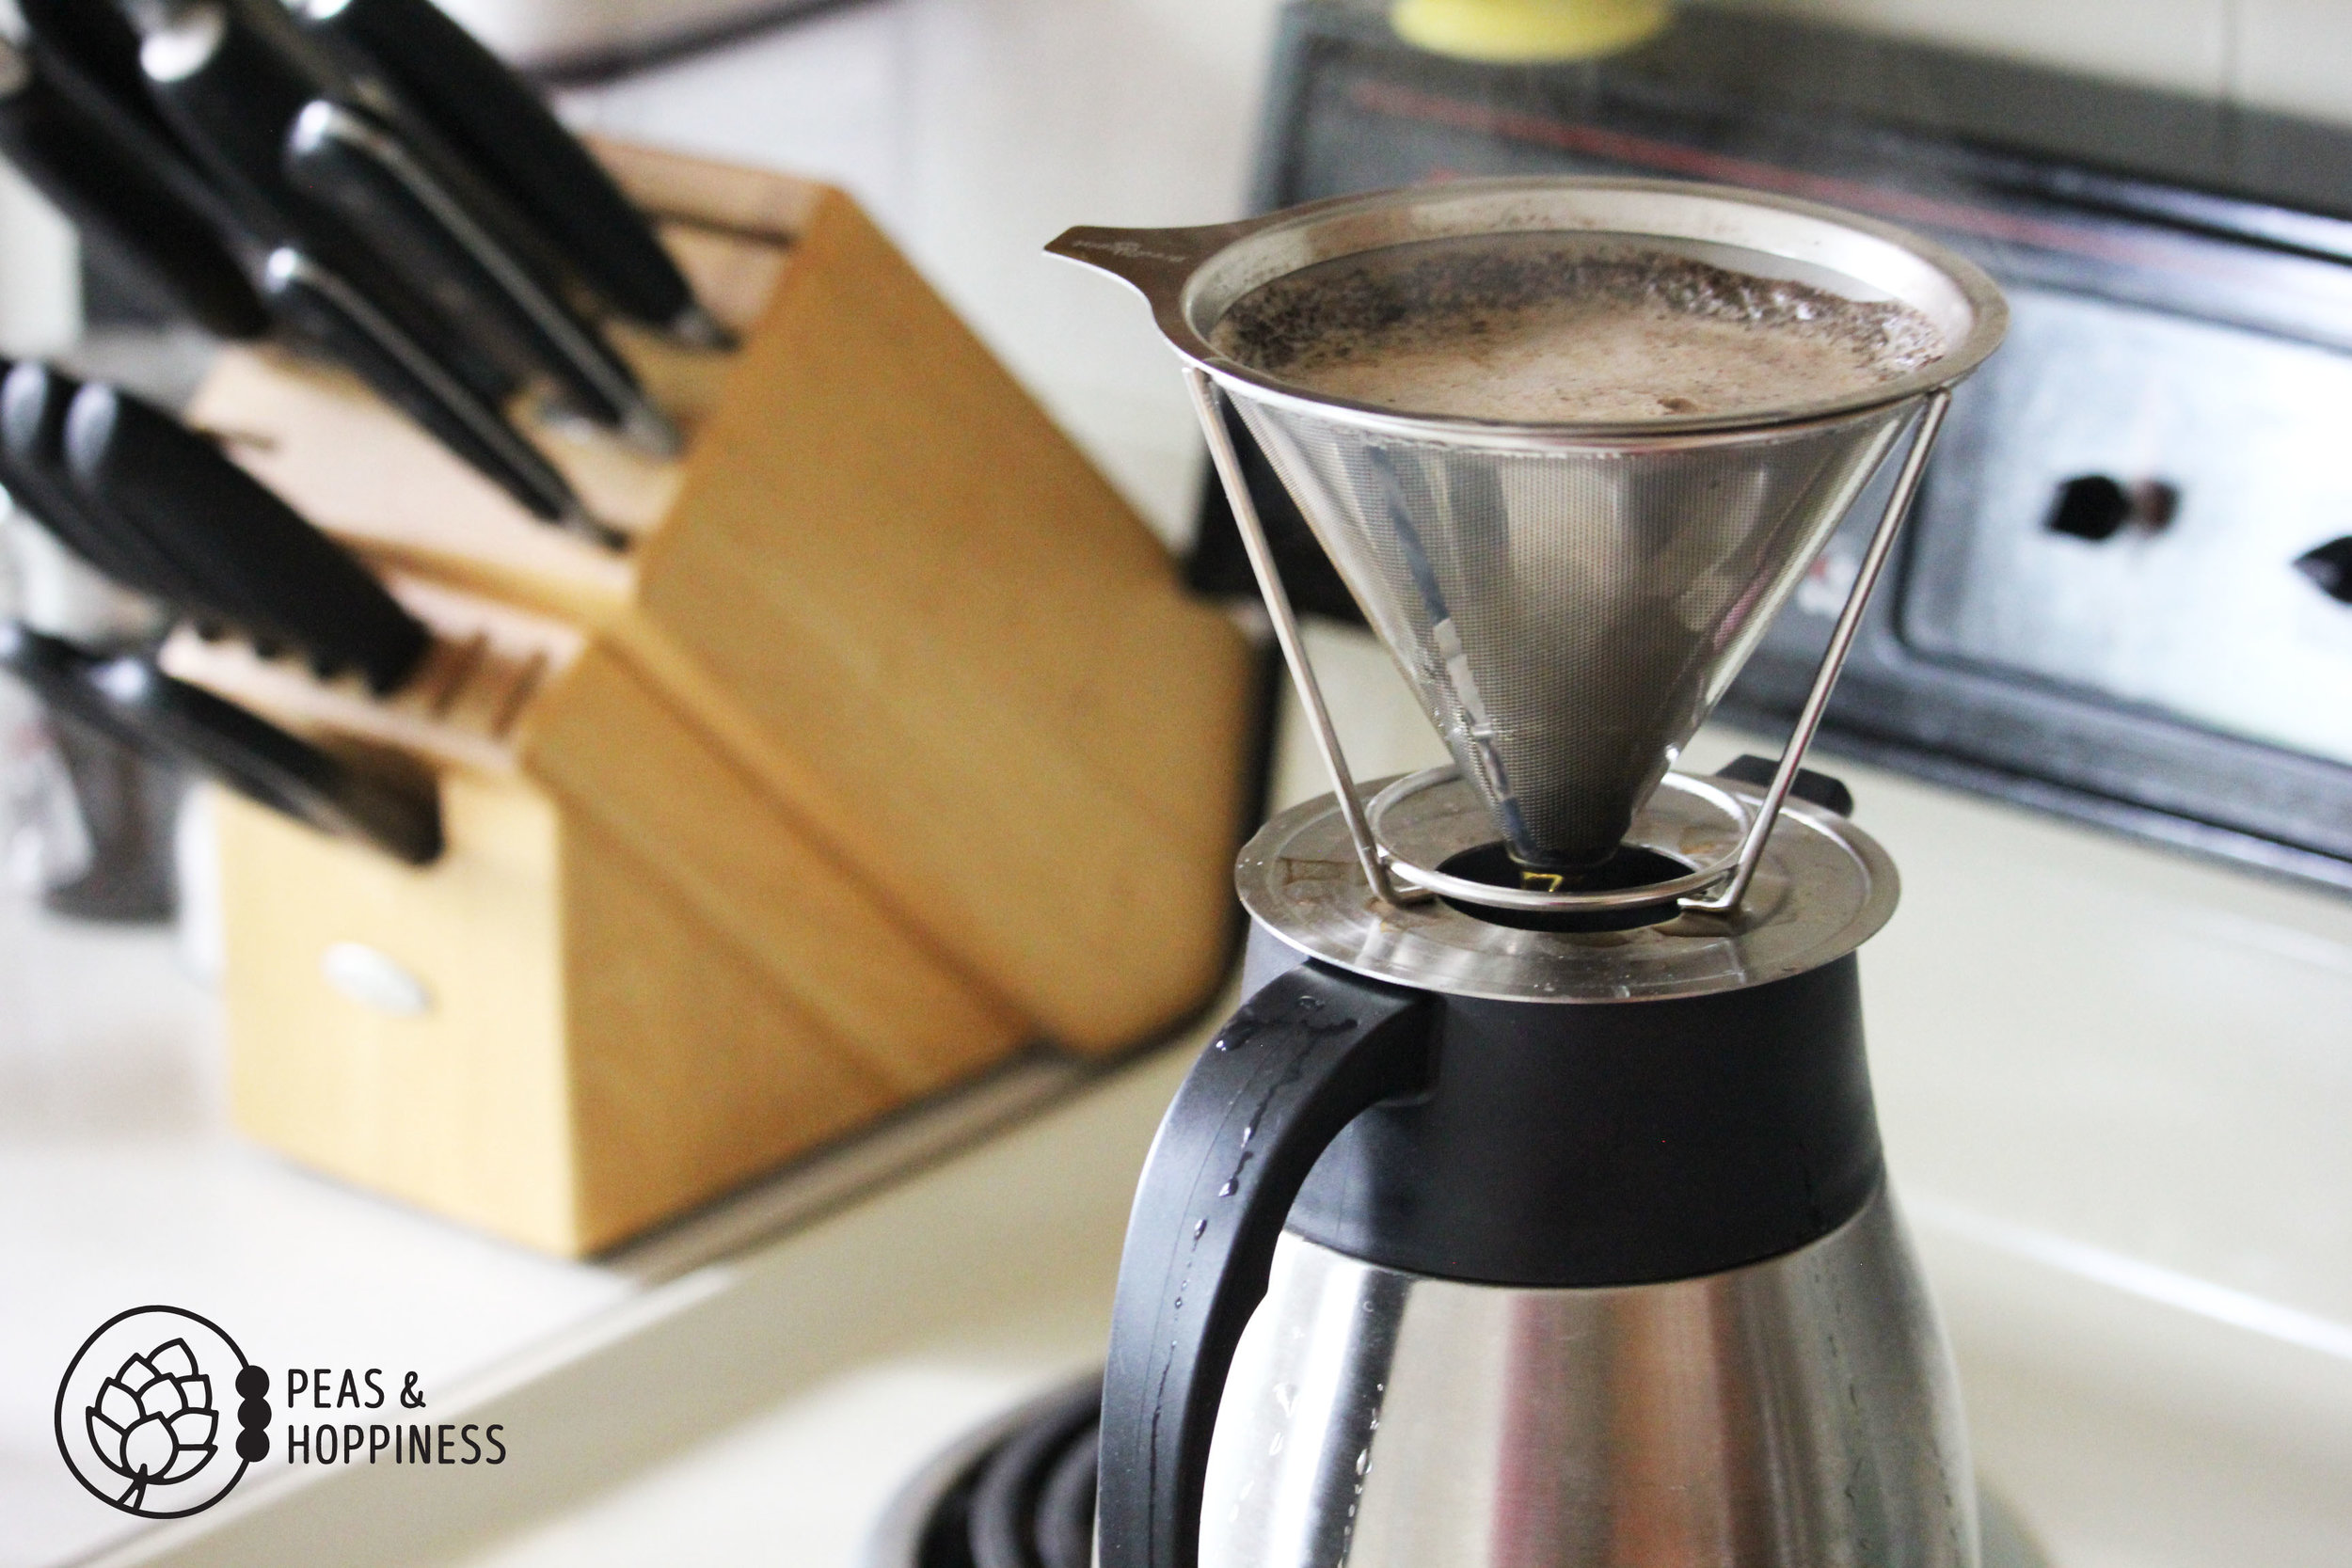 Pourover-style coffee: for the ideal water temperature to make the perfect cup of coffee.